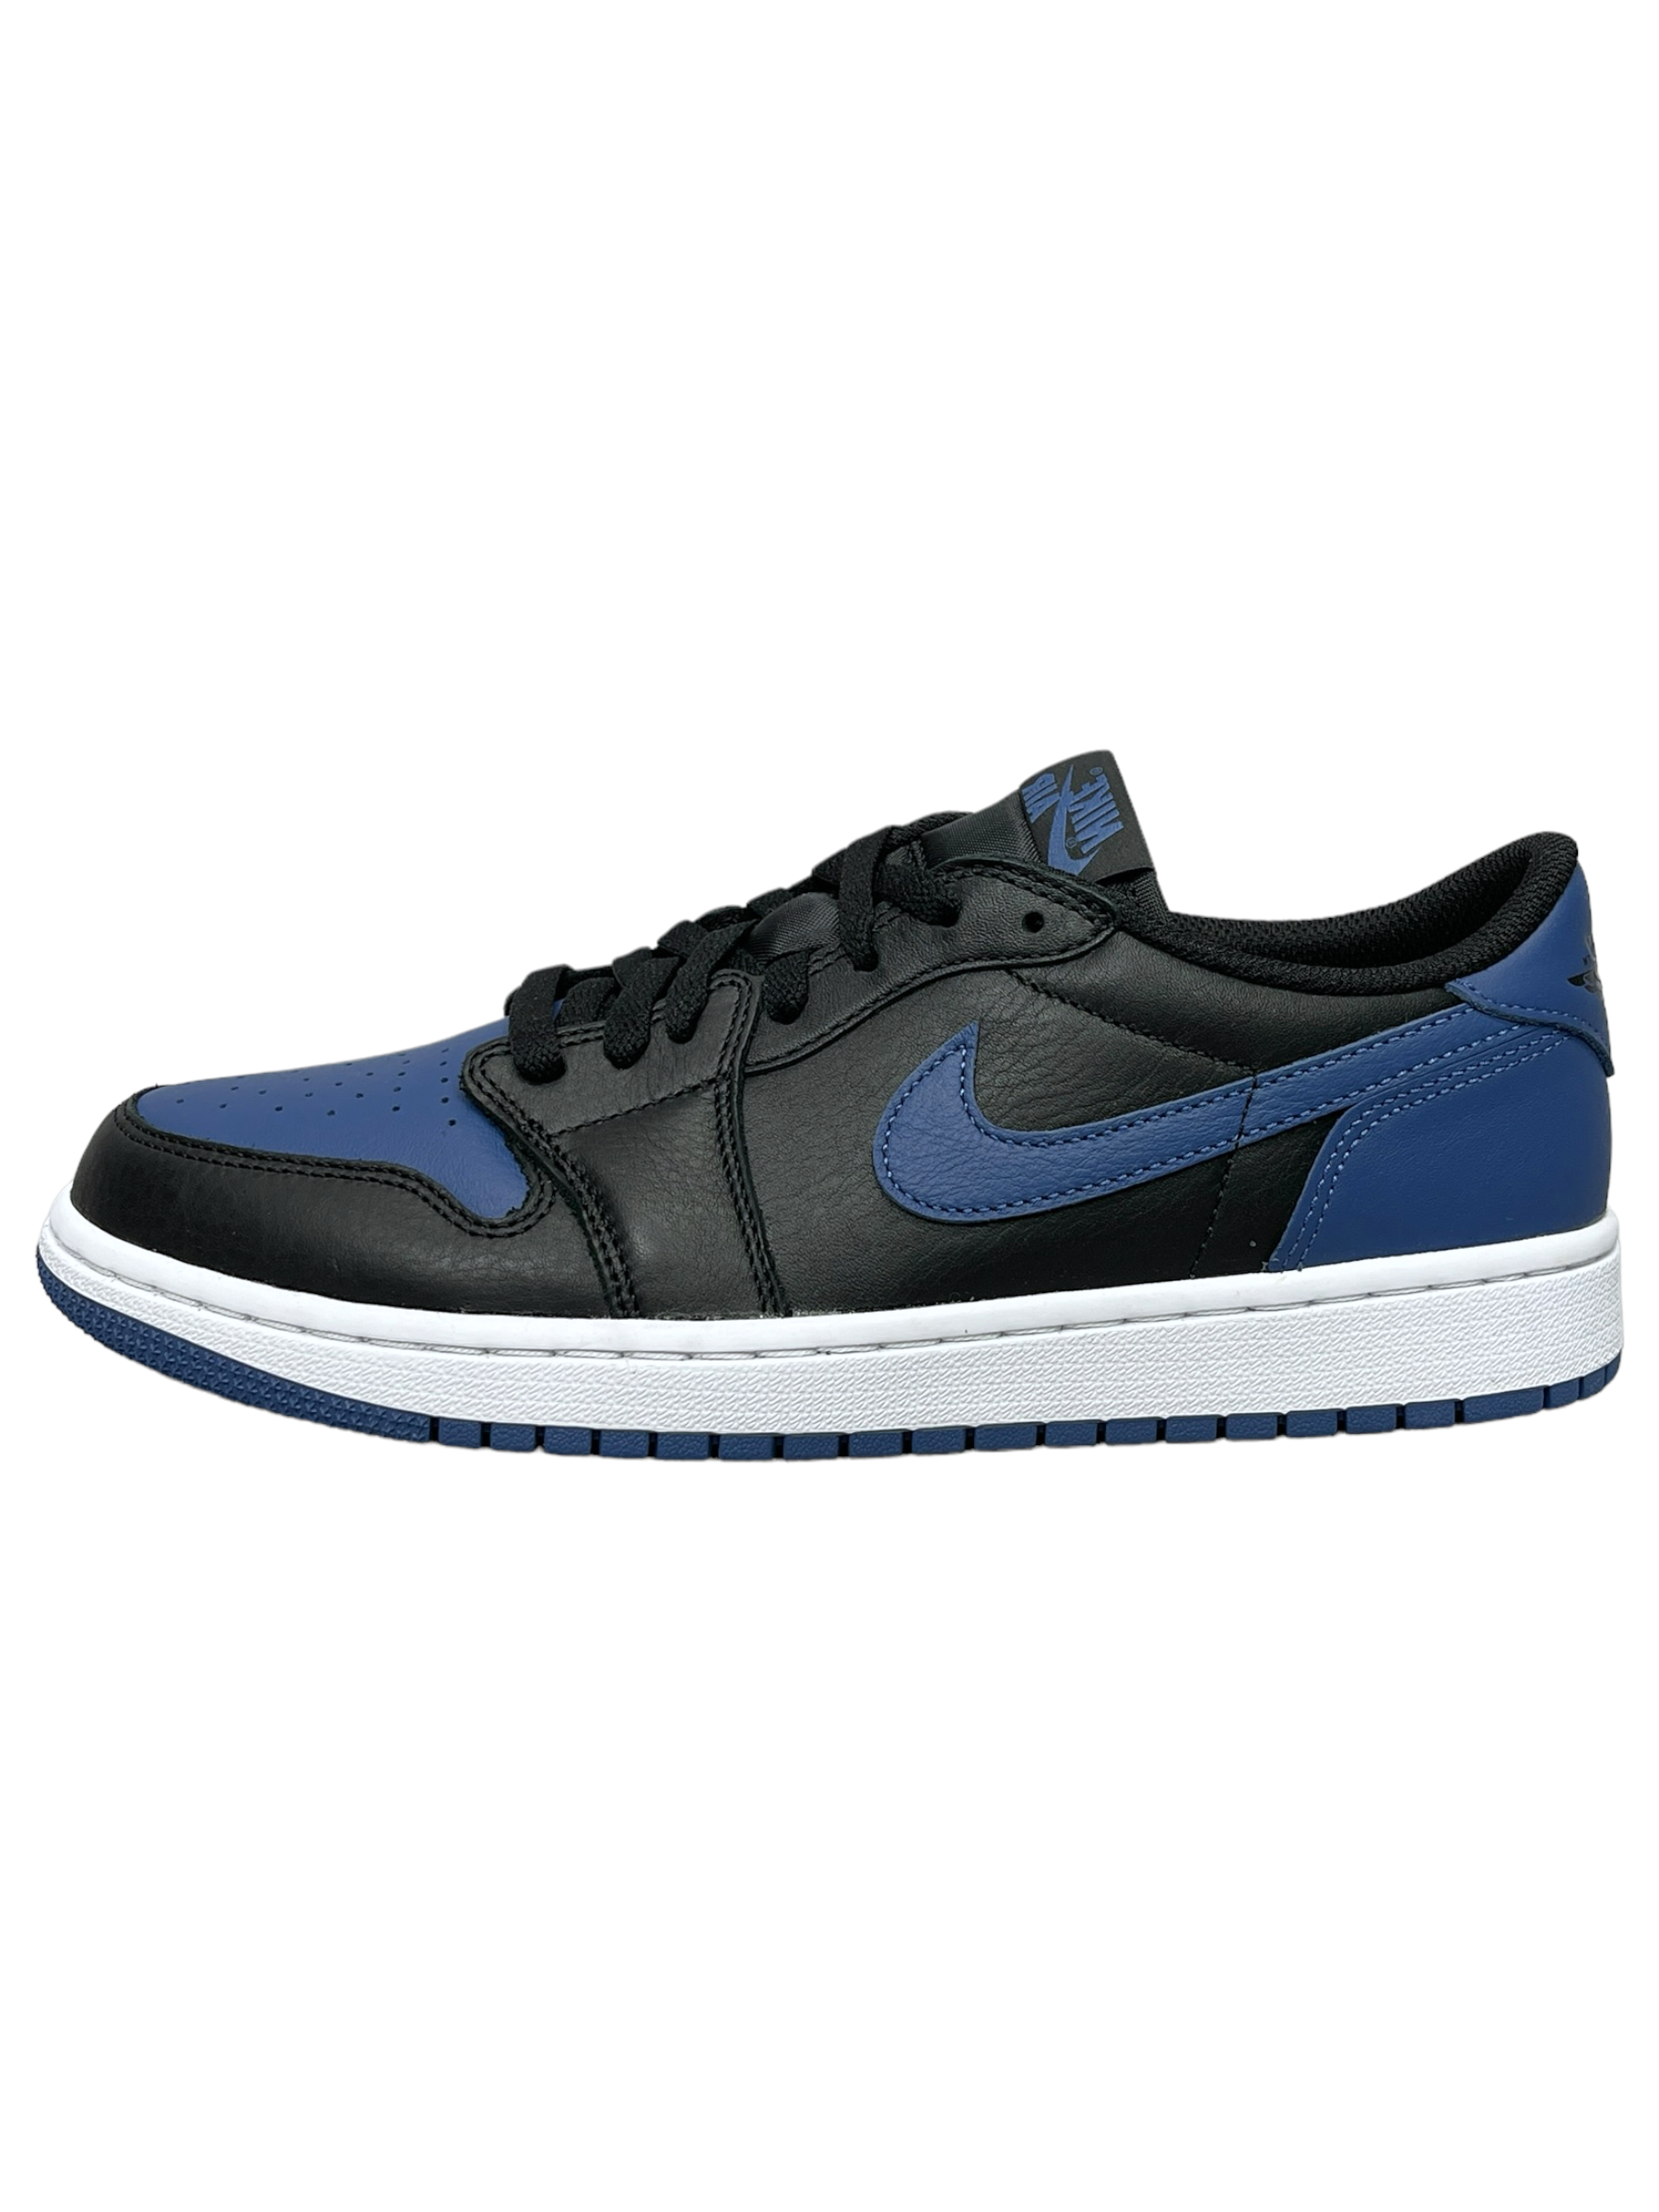 Jordan 1 Retro Low OG Mystic Navy - Genuine Design Luxury Consignment for Men. New & Pre-Owned Clothing, Shoes, & Accessories. Calgary, Canada